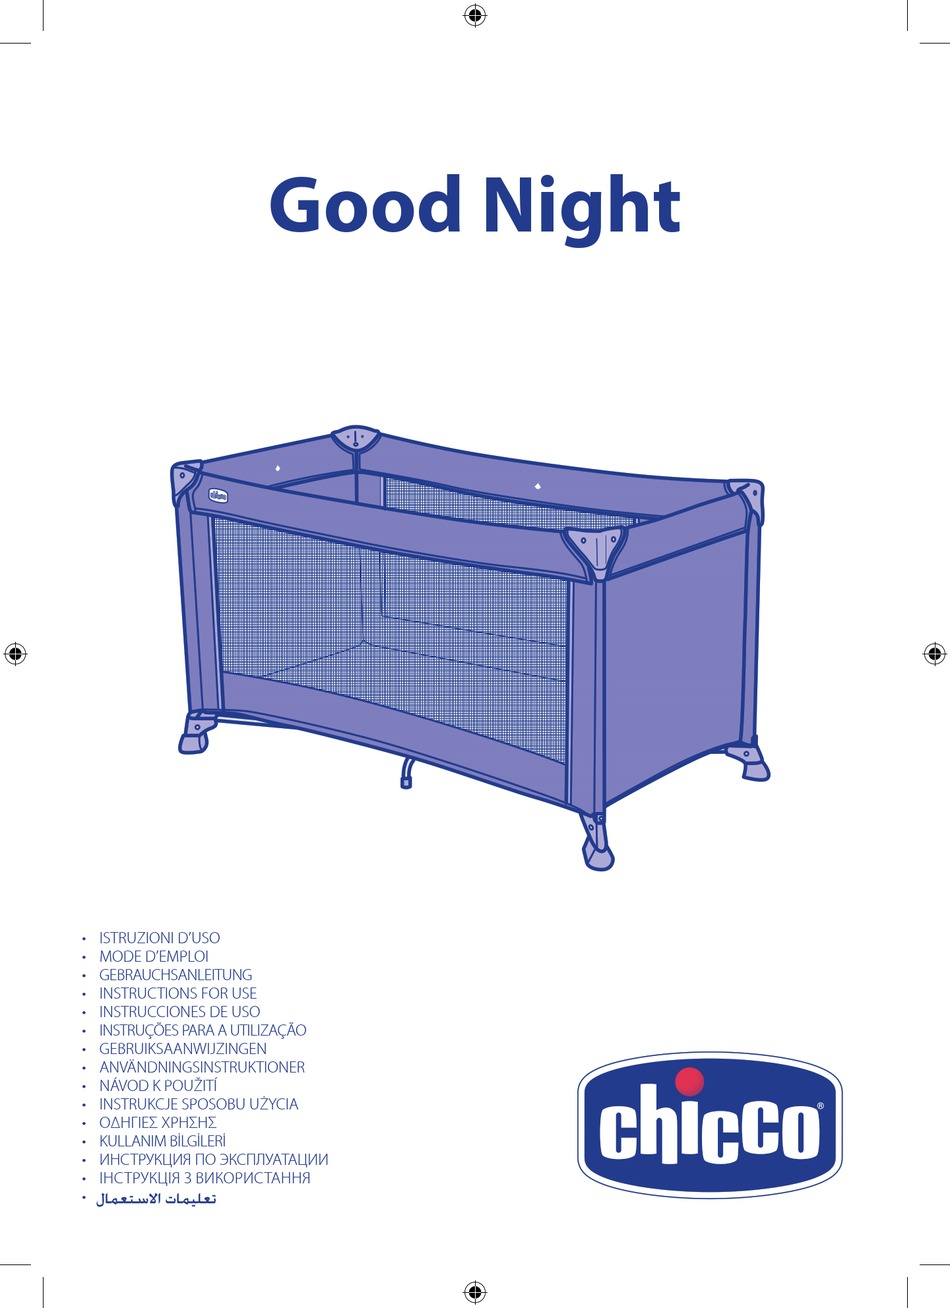 chicco goodnight travel cot instructions